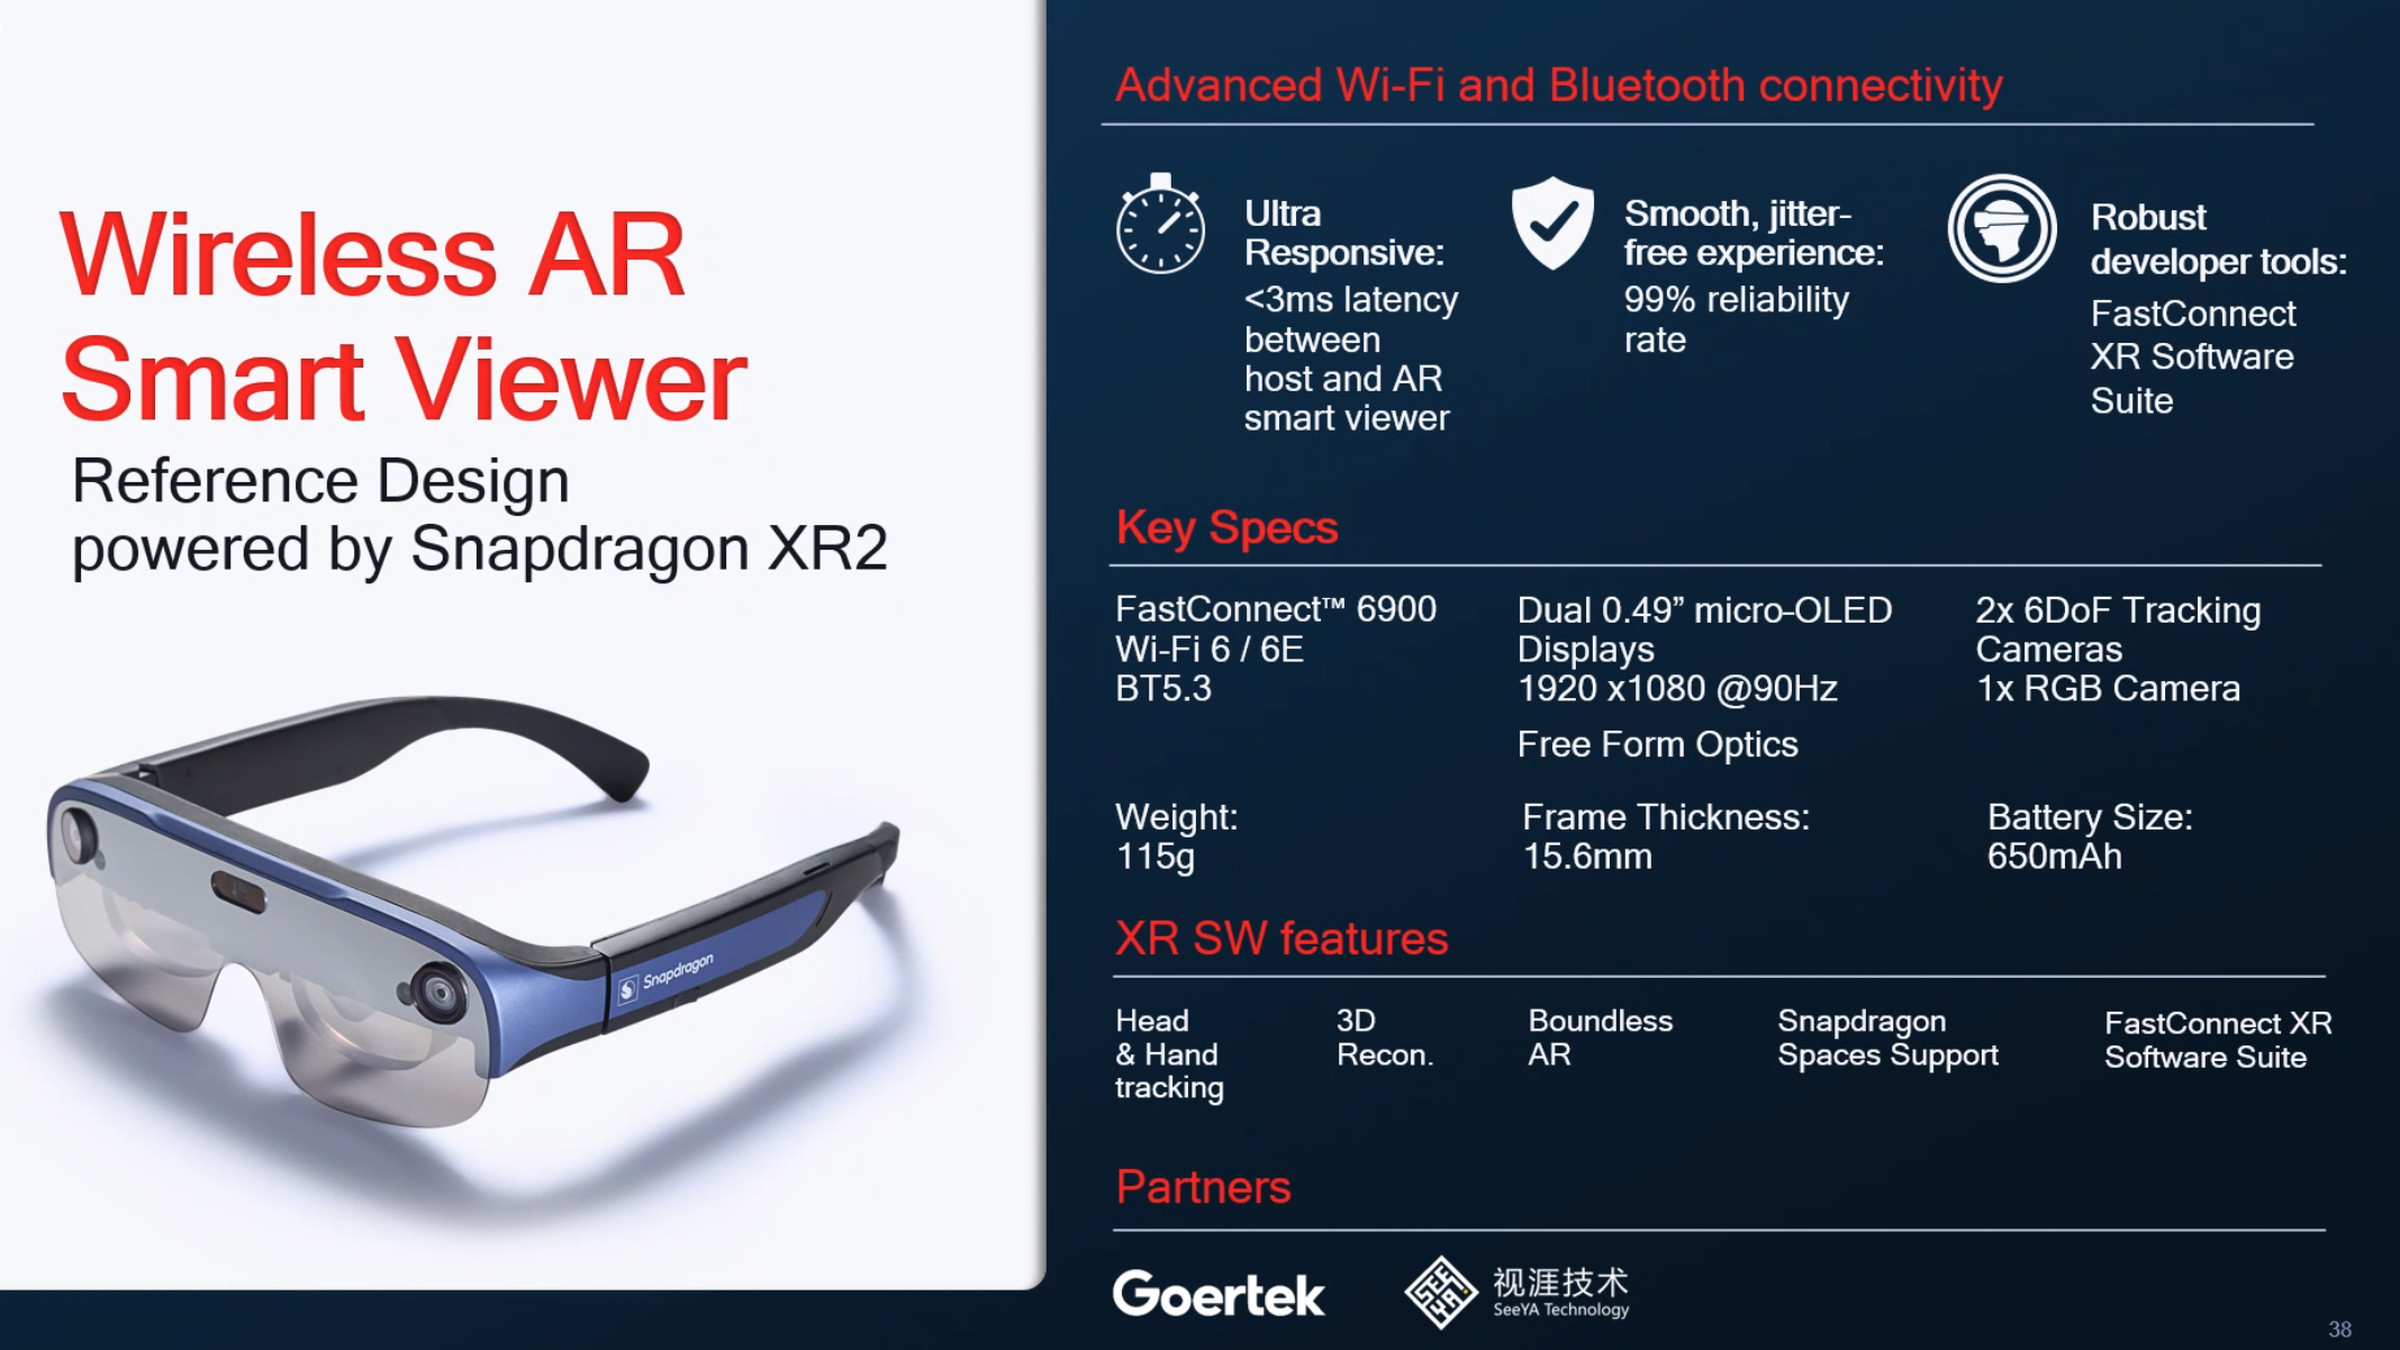 Specs for the AR Smart Viewer as described in article